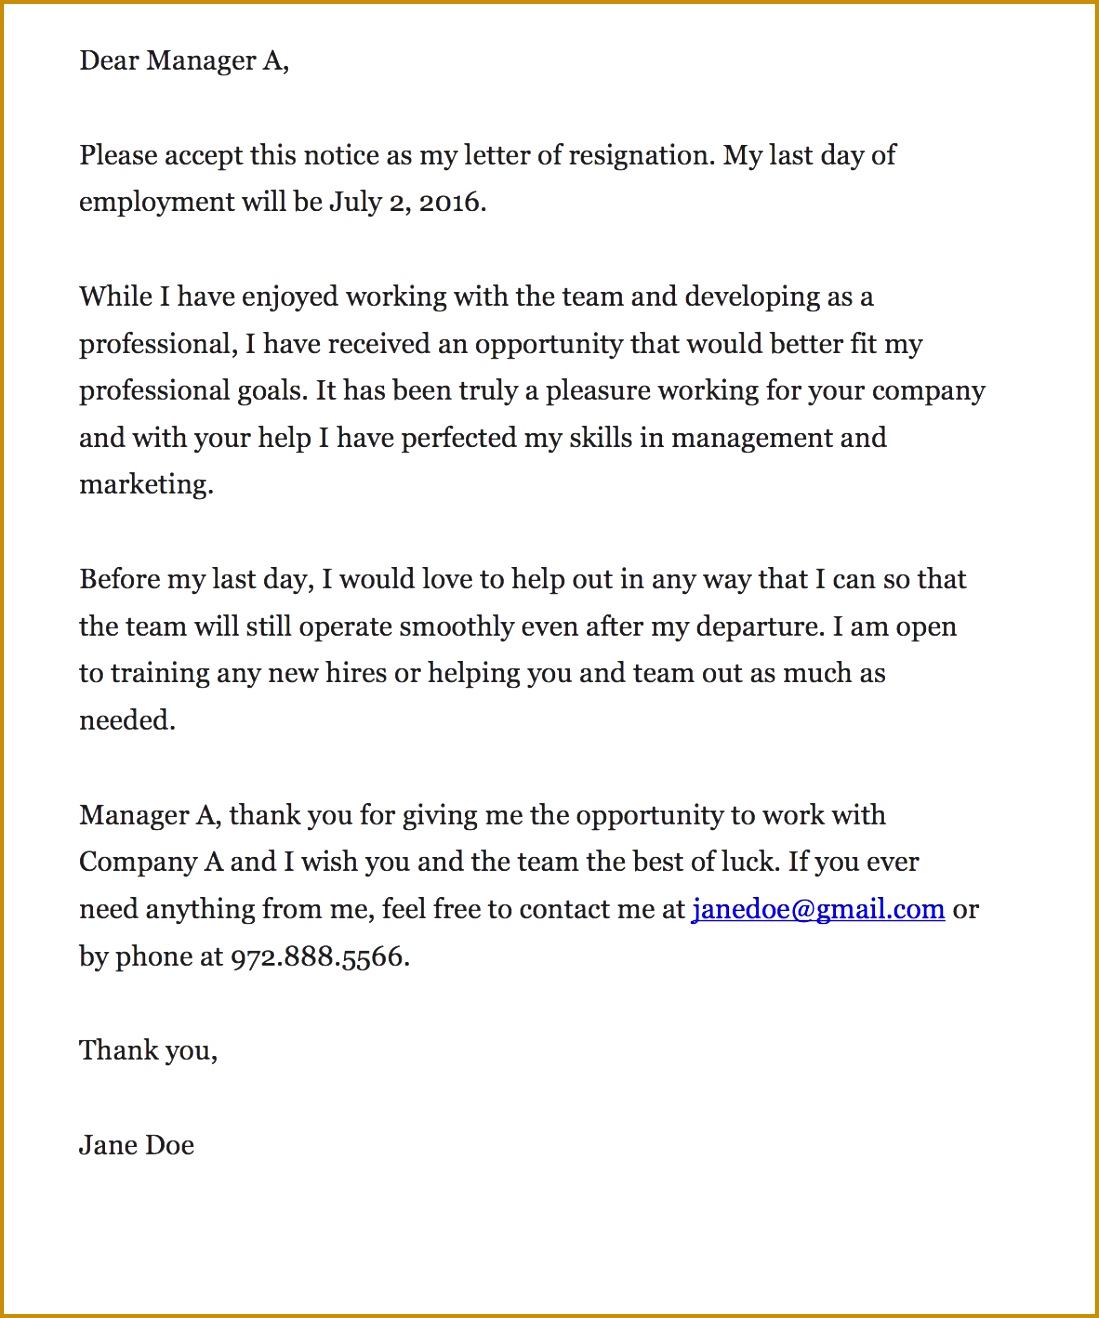 Appreciation Letter After Resignation Resignation Letter Format Chief Executive Thank You Letter To Boss After Resignation 13181099